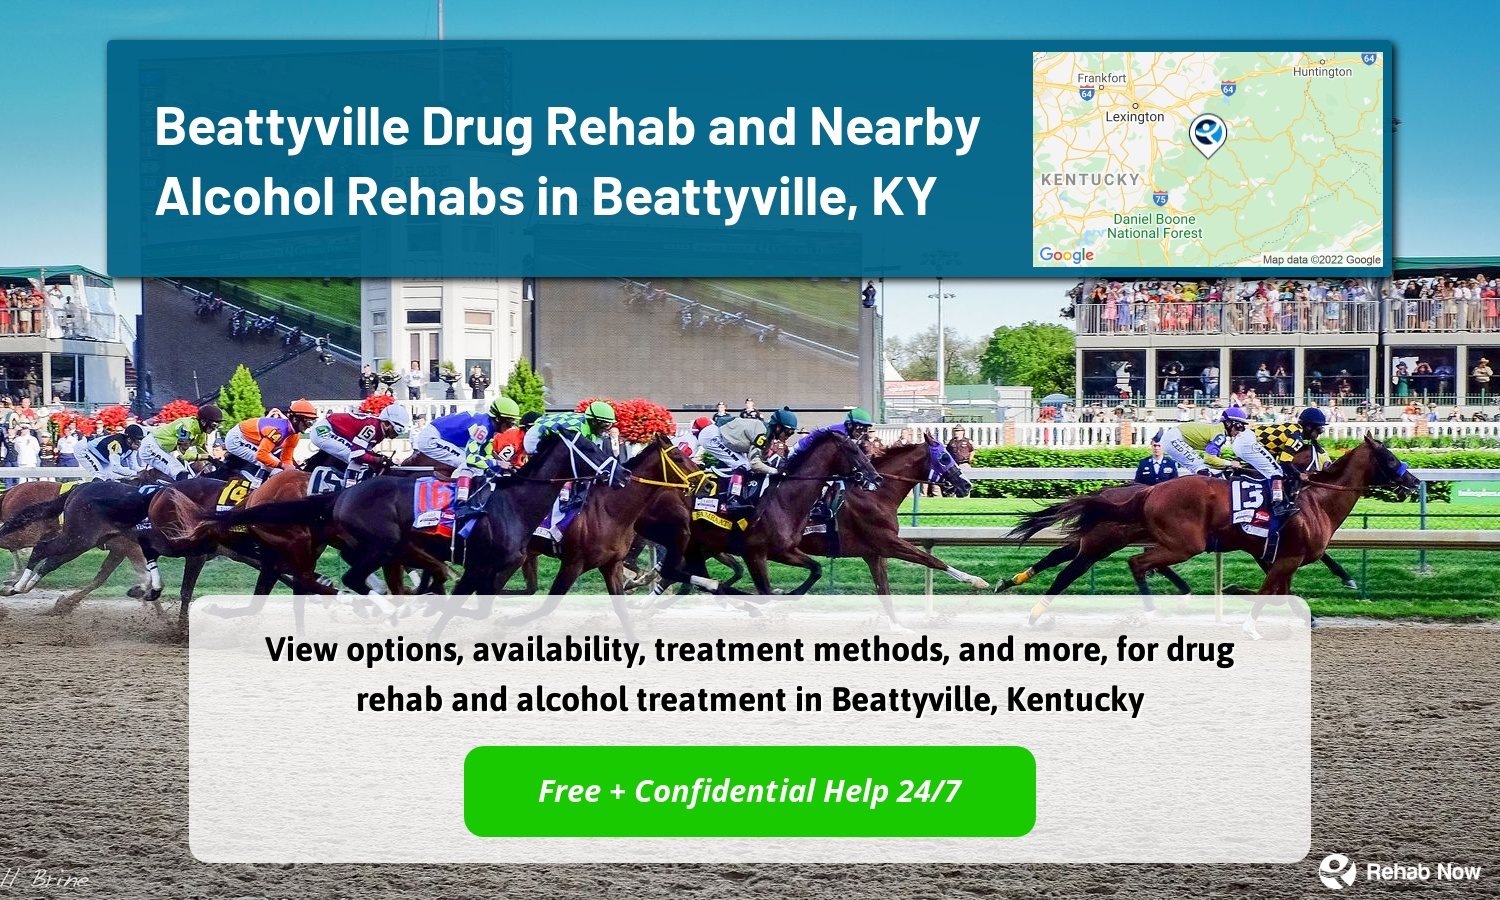 View options, availability, treatment methods, and more, for drug rehab and alcohol treatment in Beattyville, Kentucky